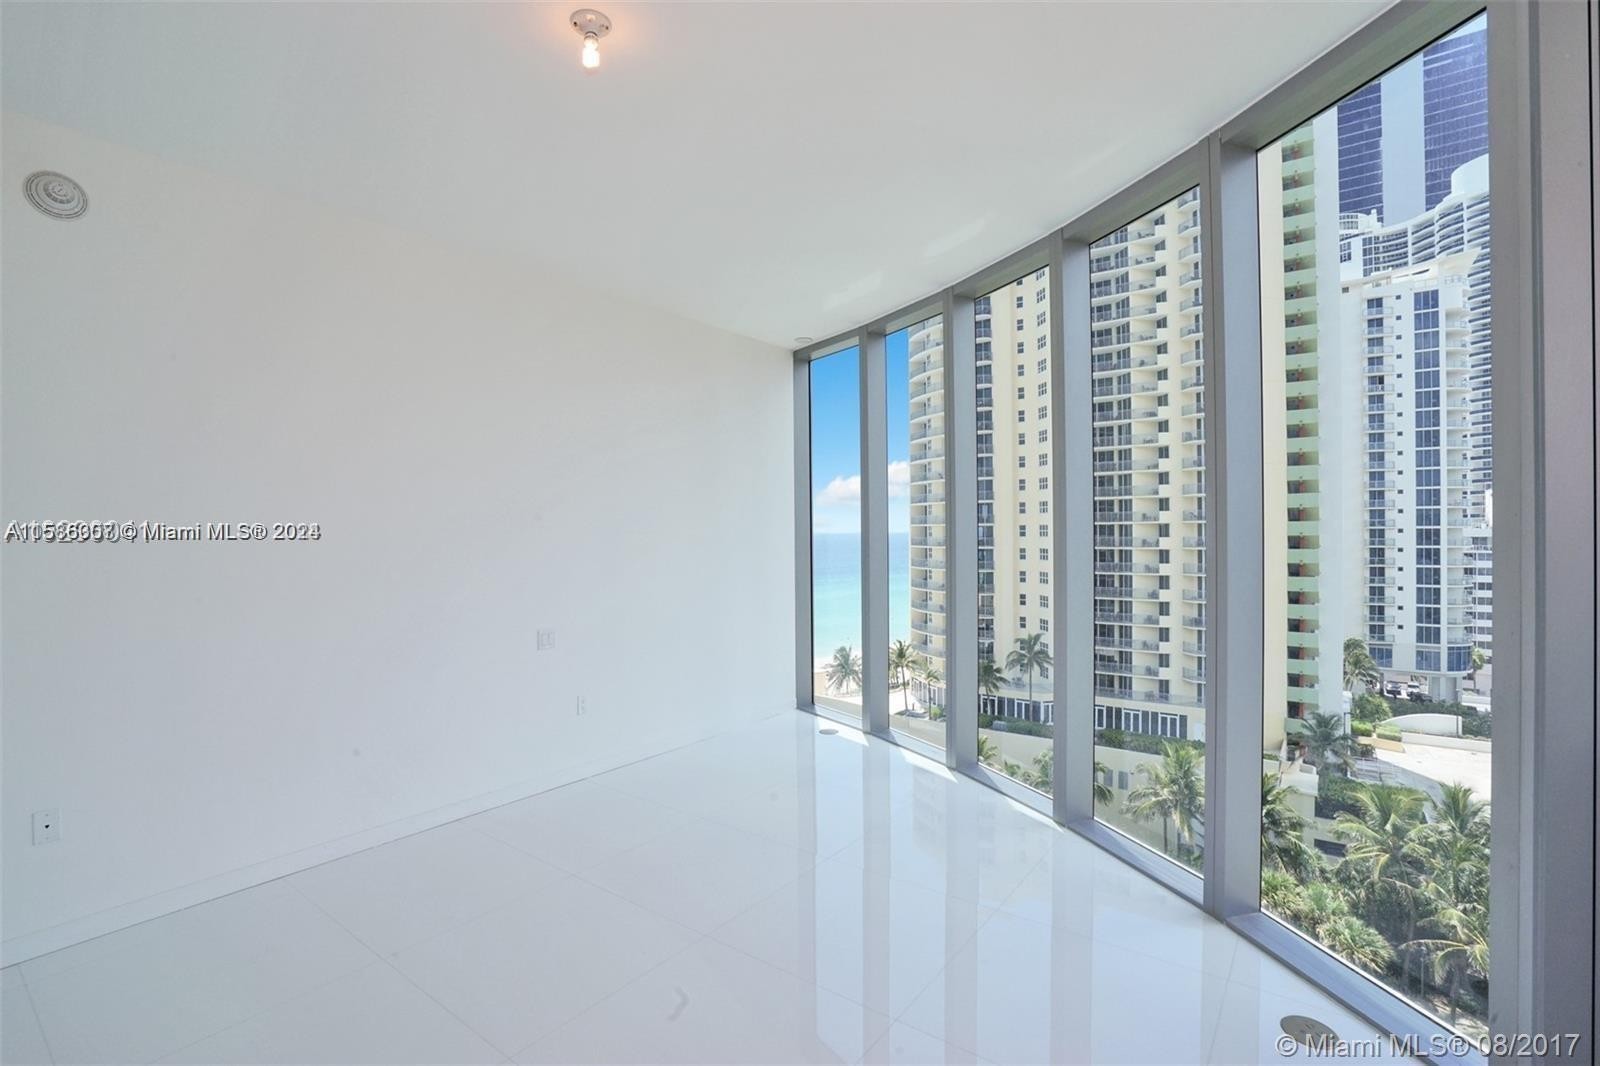 11. 17475 Collins Ave